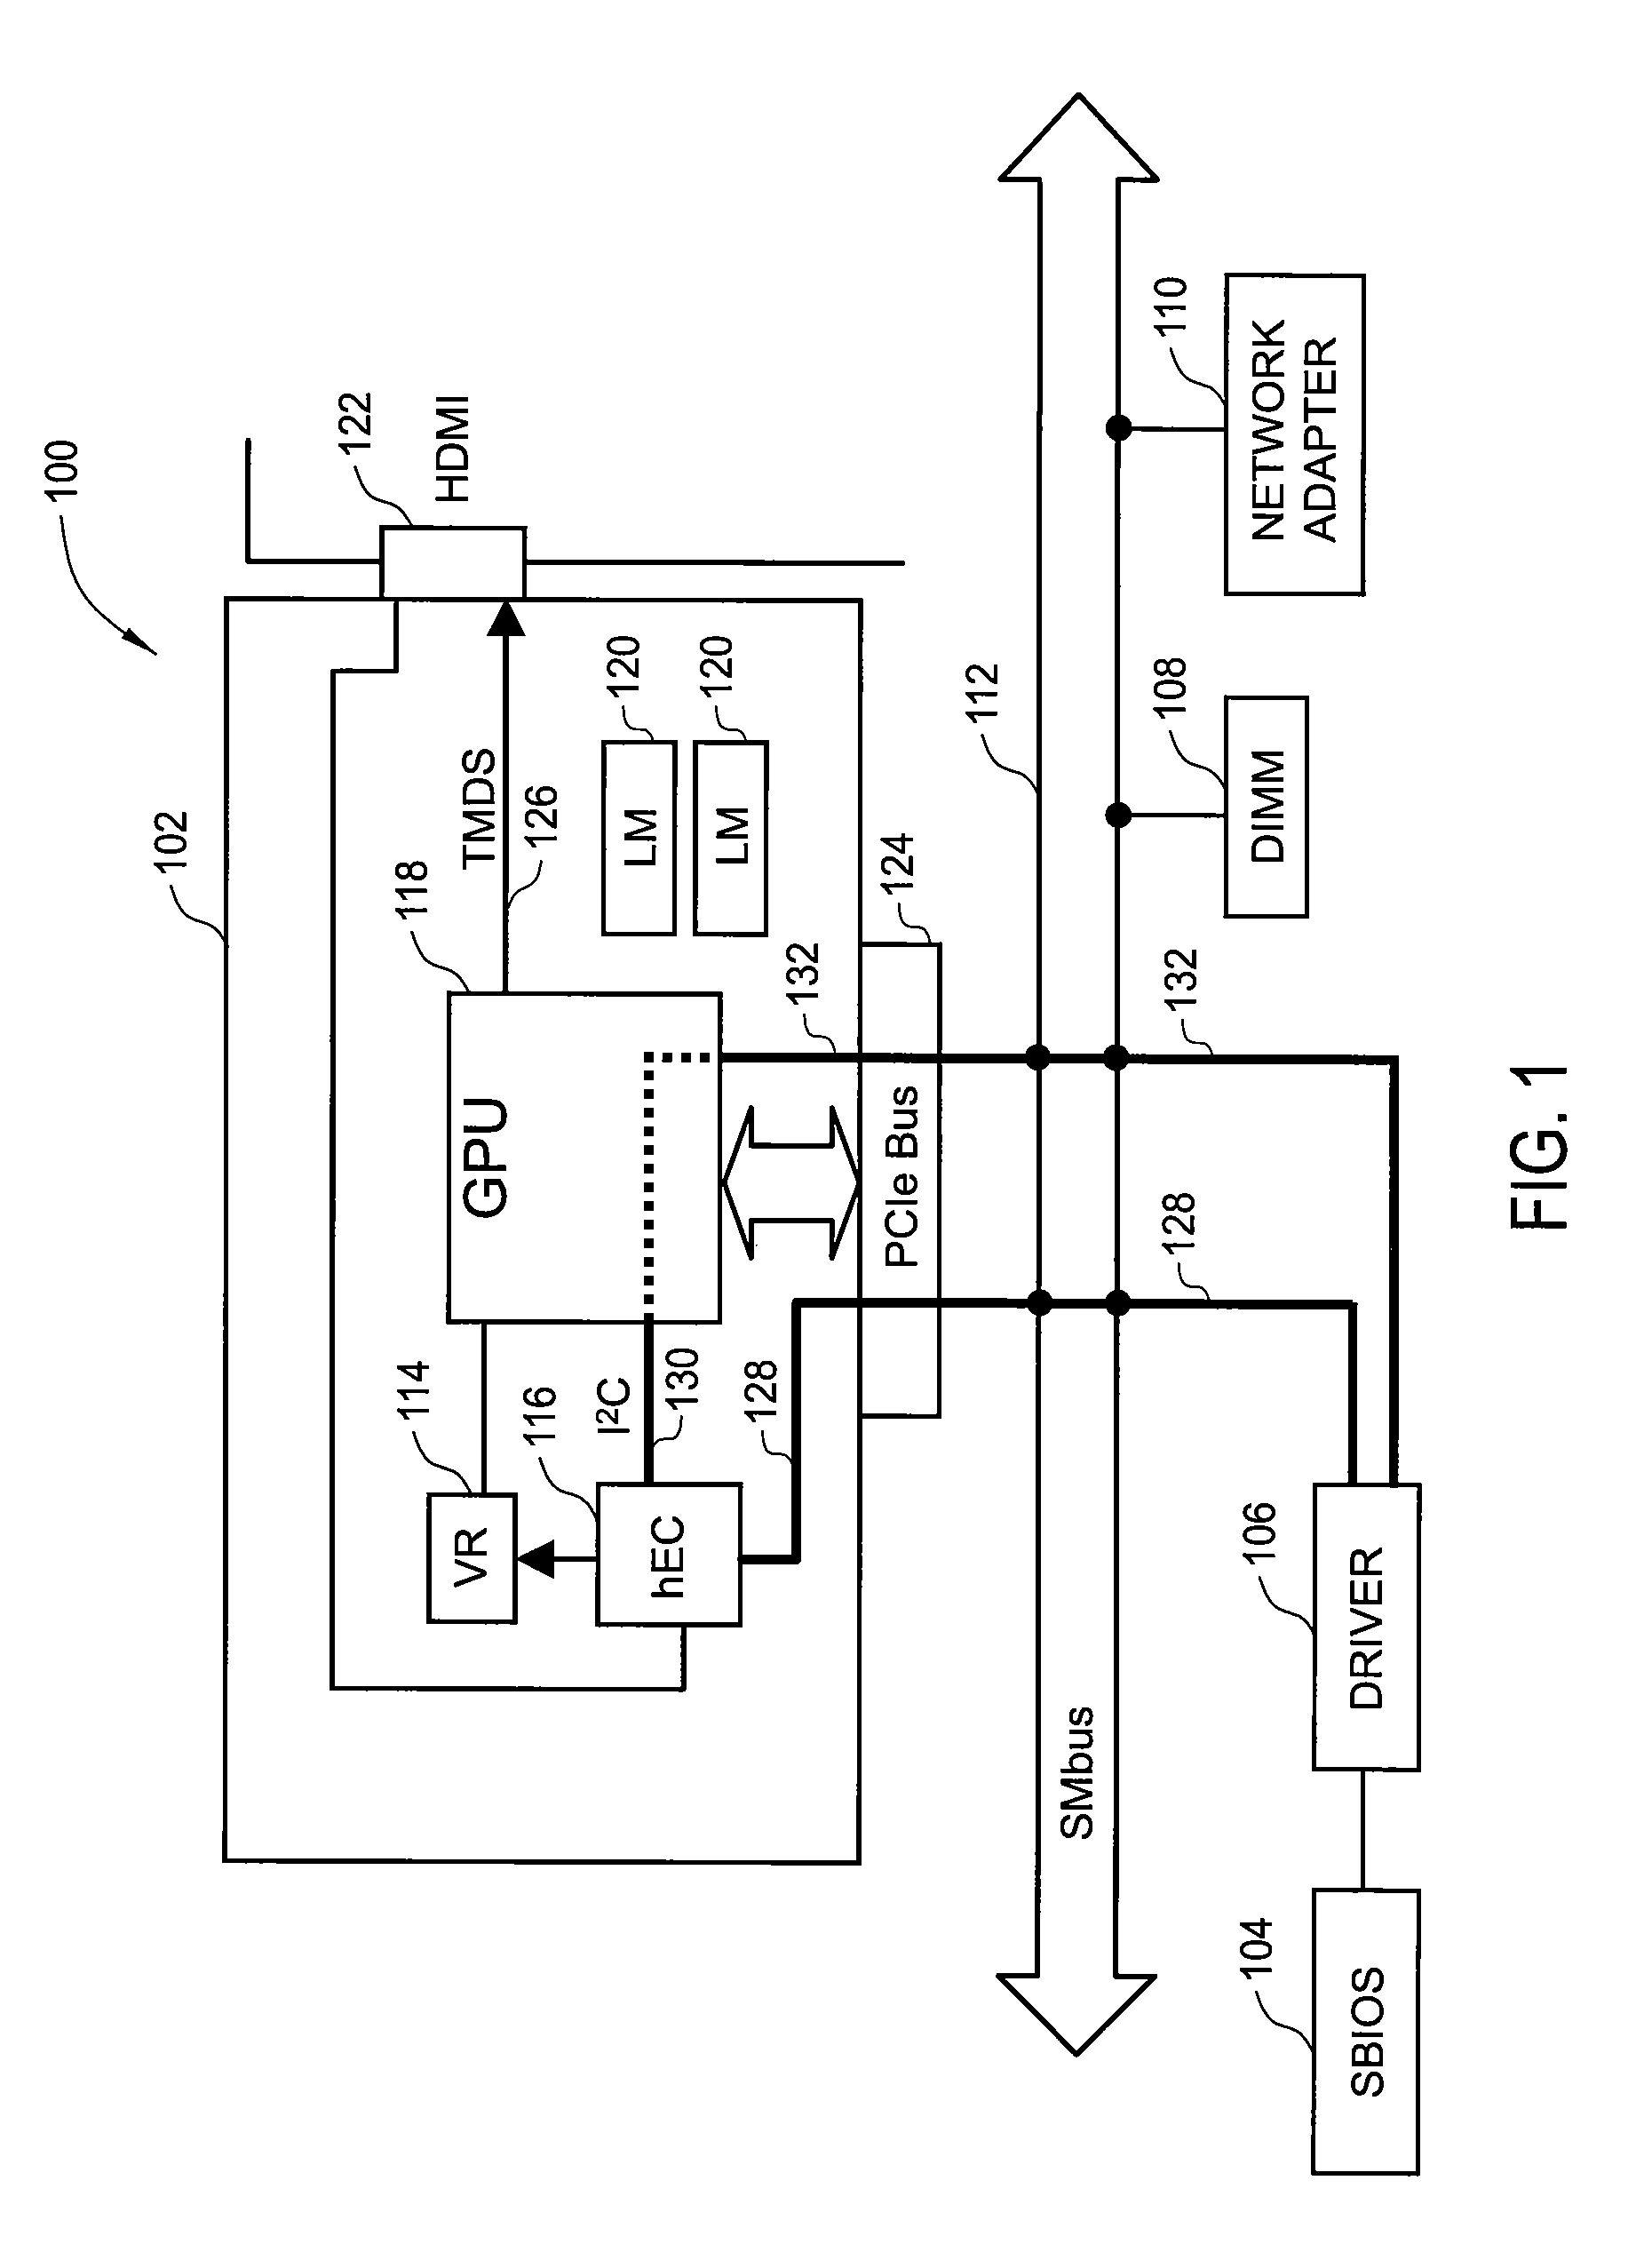 System and method for determining a bus address on an add-in card